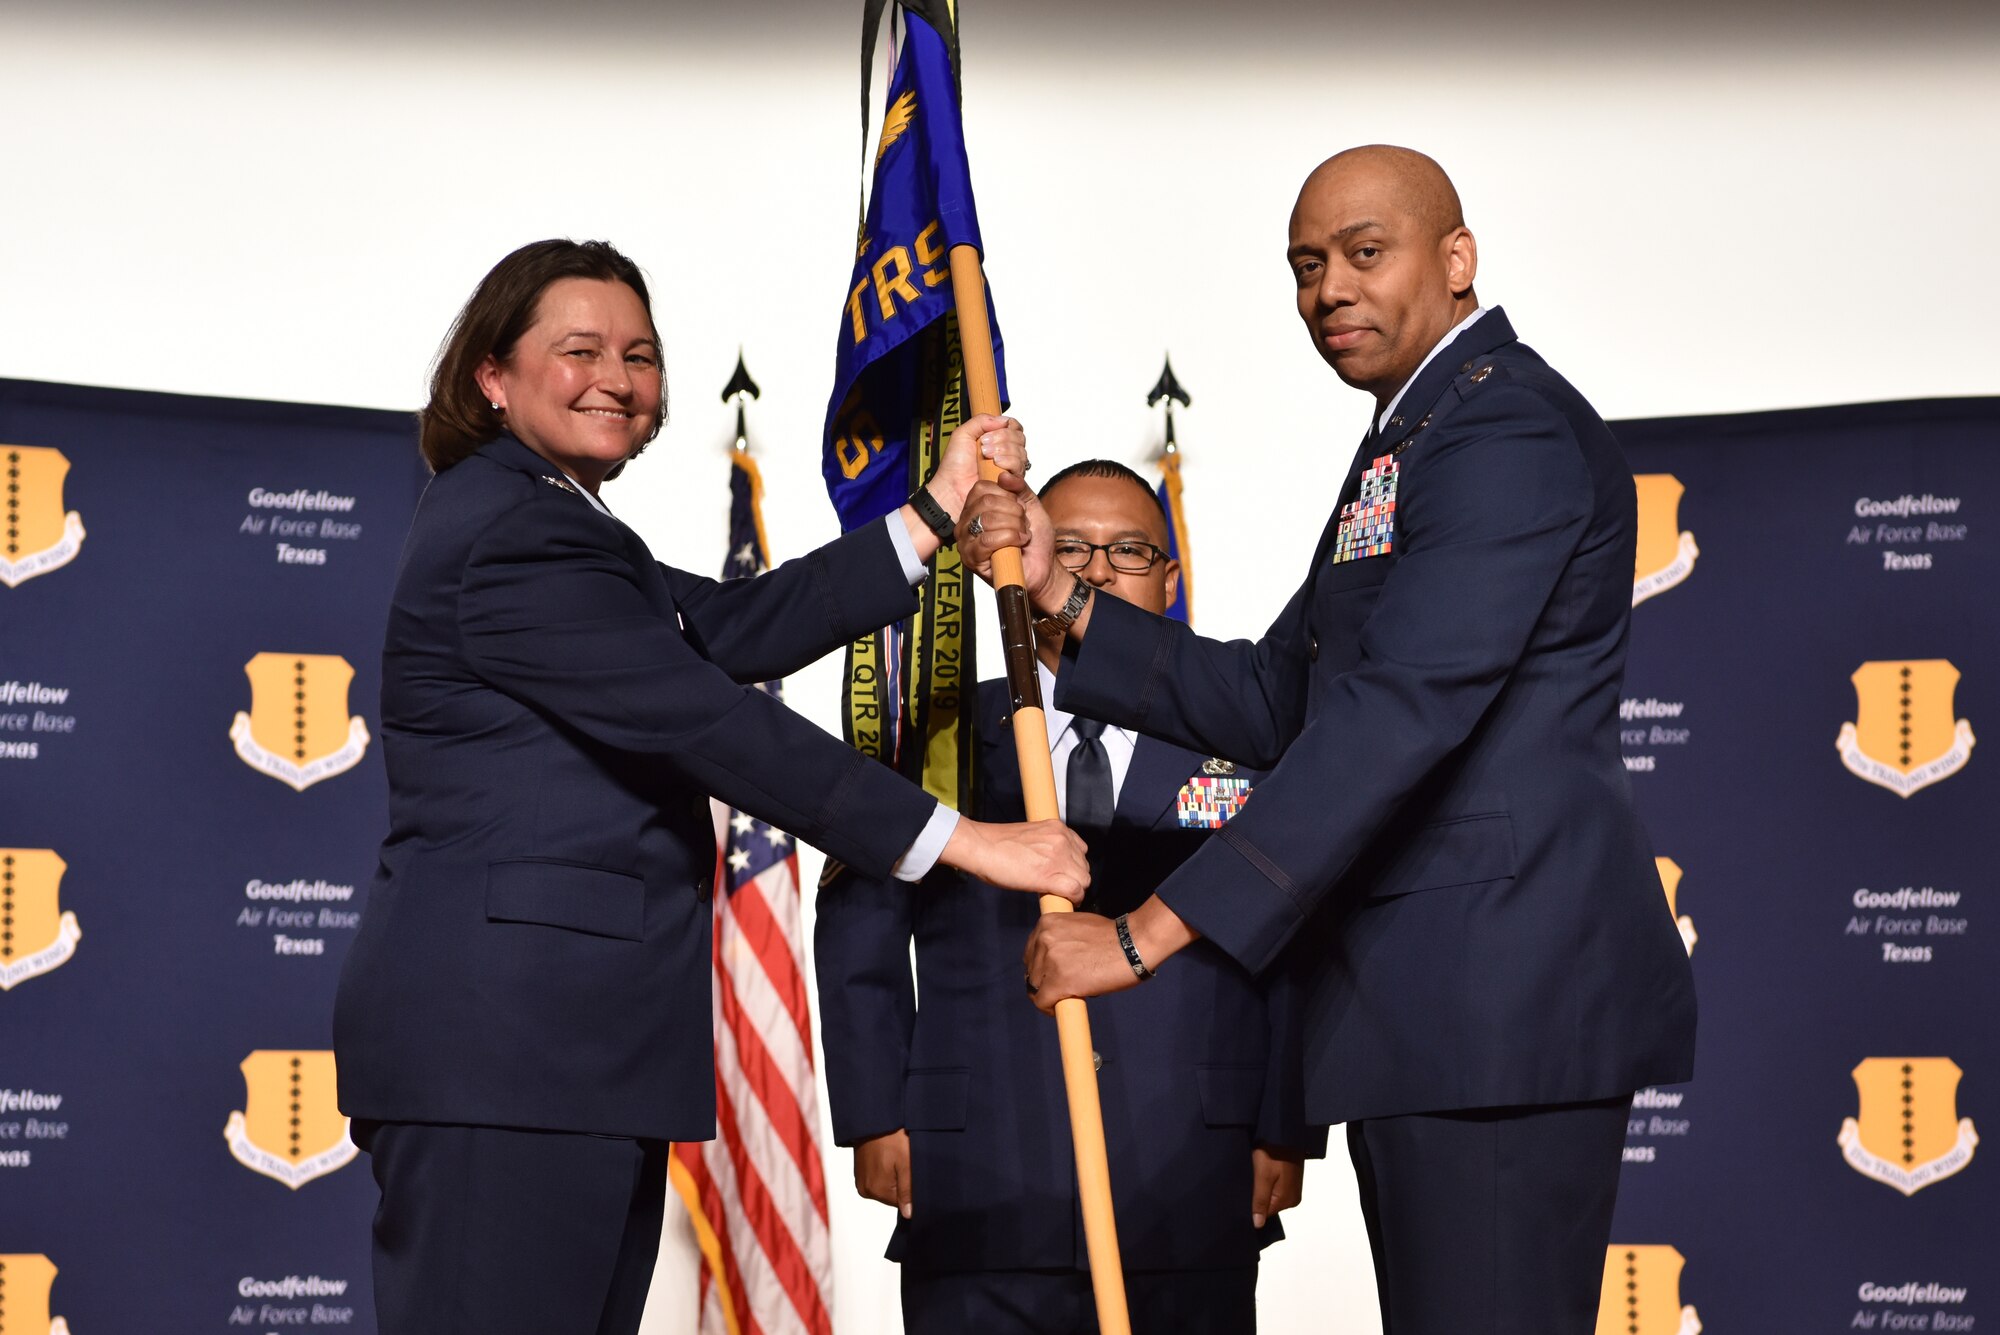 U.S. Air Force Col. Angelina Maguinness, 17th Training Group commander, passes the guidon to Lt. Col. Erwin Mason, incoming 316th Training Squadron commander, during the change of command ceremony at the Base Theater on Goodfellow Air Force Base, Texas, June 18, 2021. Mason was previously the chief for the Middle East and Africa Division at the U.S. Cyber Command in Maryland. (U.S. Air Force photo by 2nd Lt. Steve Garrett)